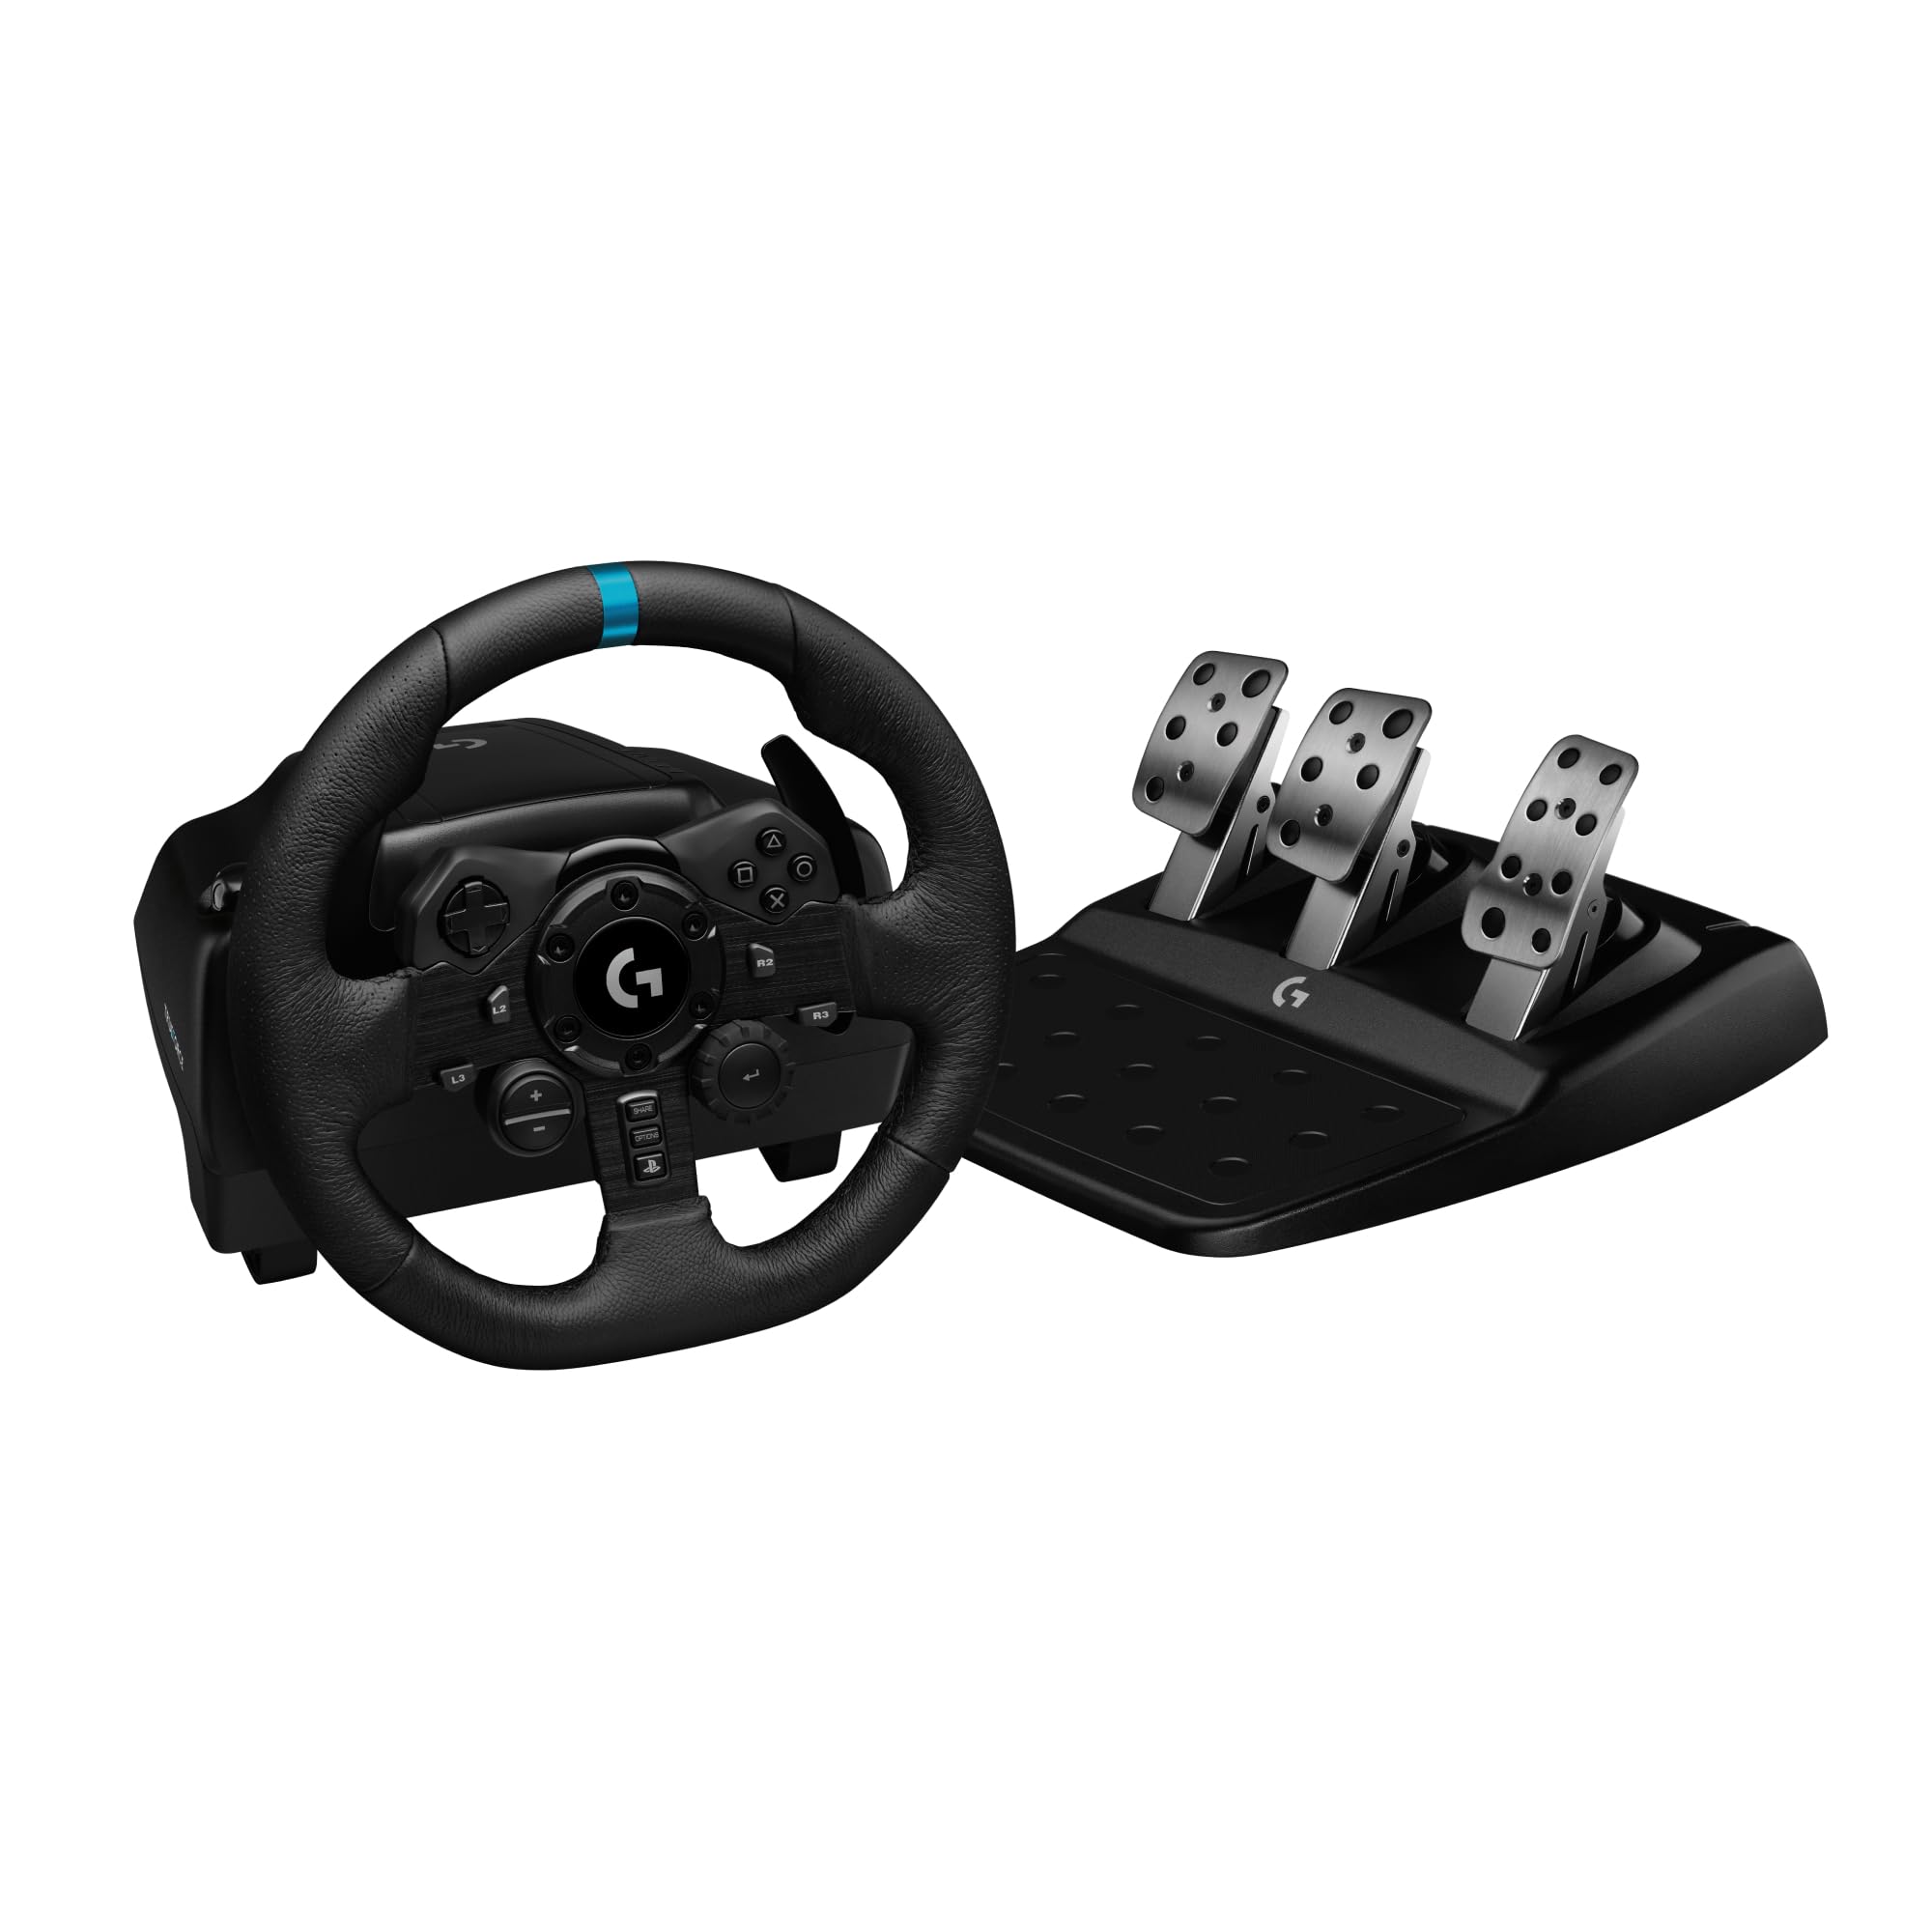 Logitech G923 Racing Wheel and Pedals for PS 5, PS4 and PC featuring TRUEFORCE $279.99 + Free Shipping